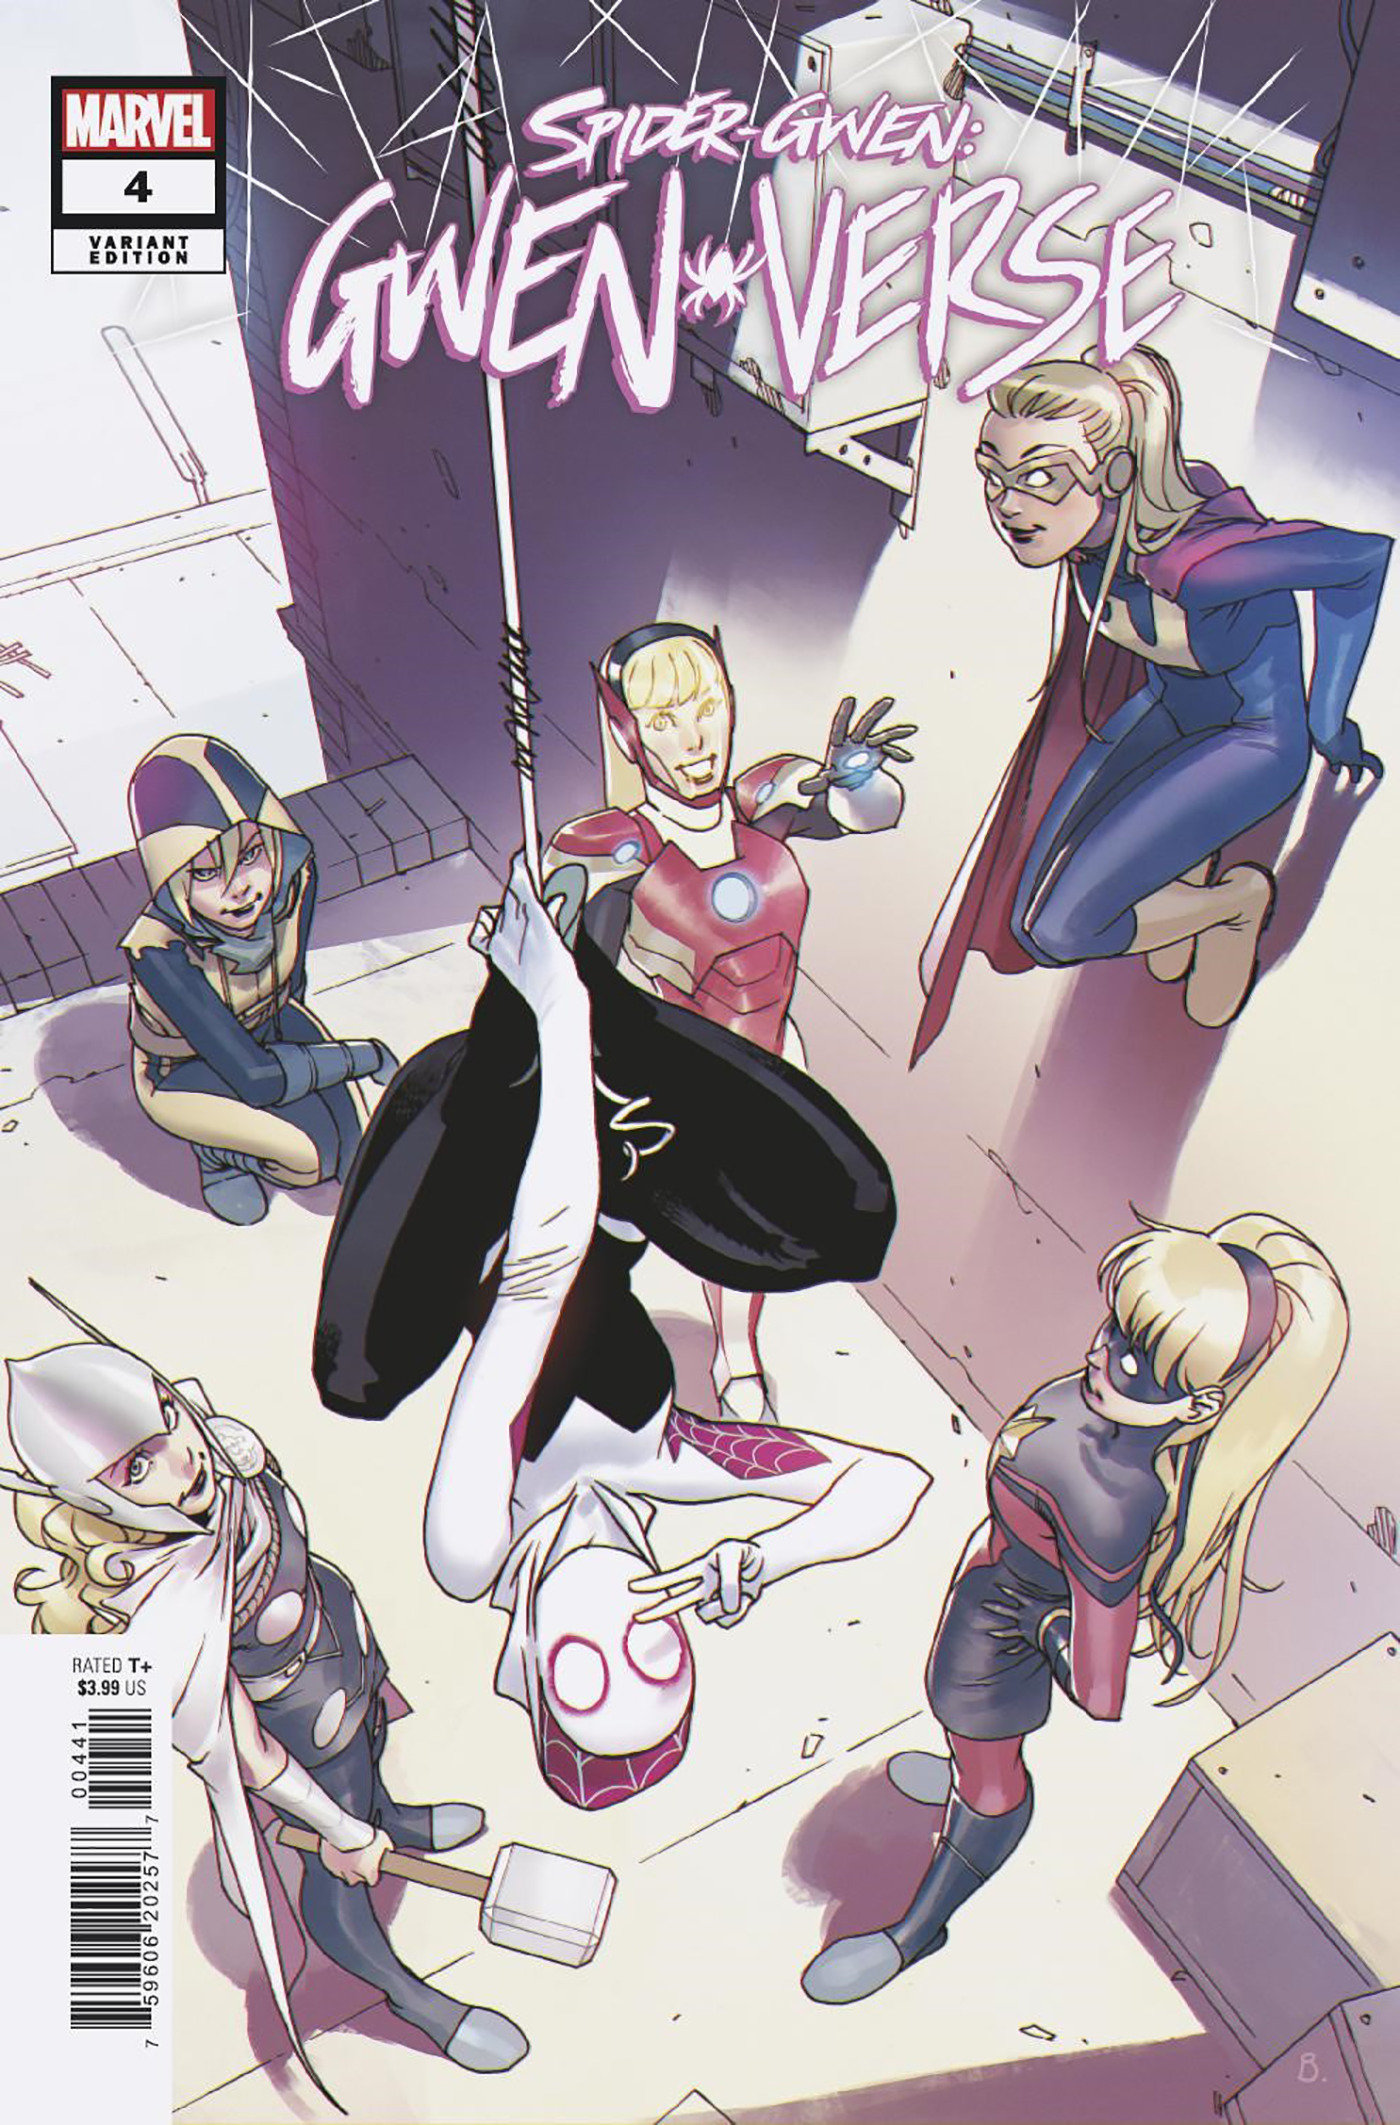 Spider-Gwen Gwenverse #4 1 for 25 Incentive Bengal Variant (Of 5)